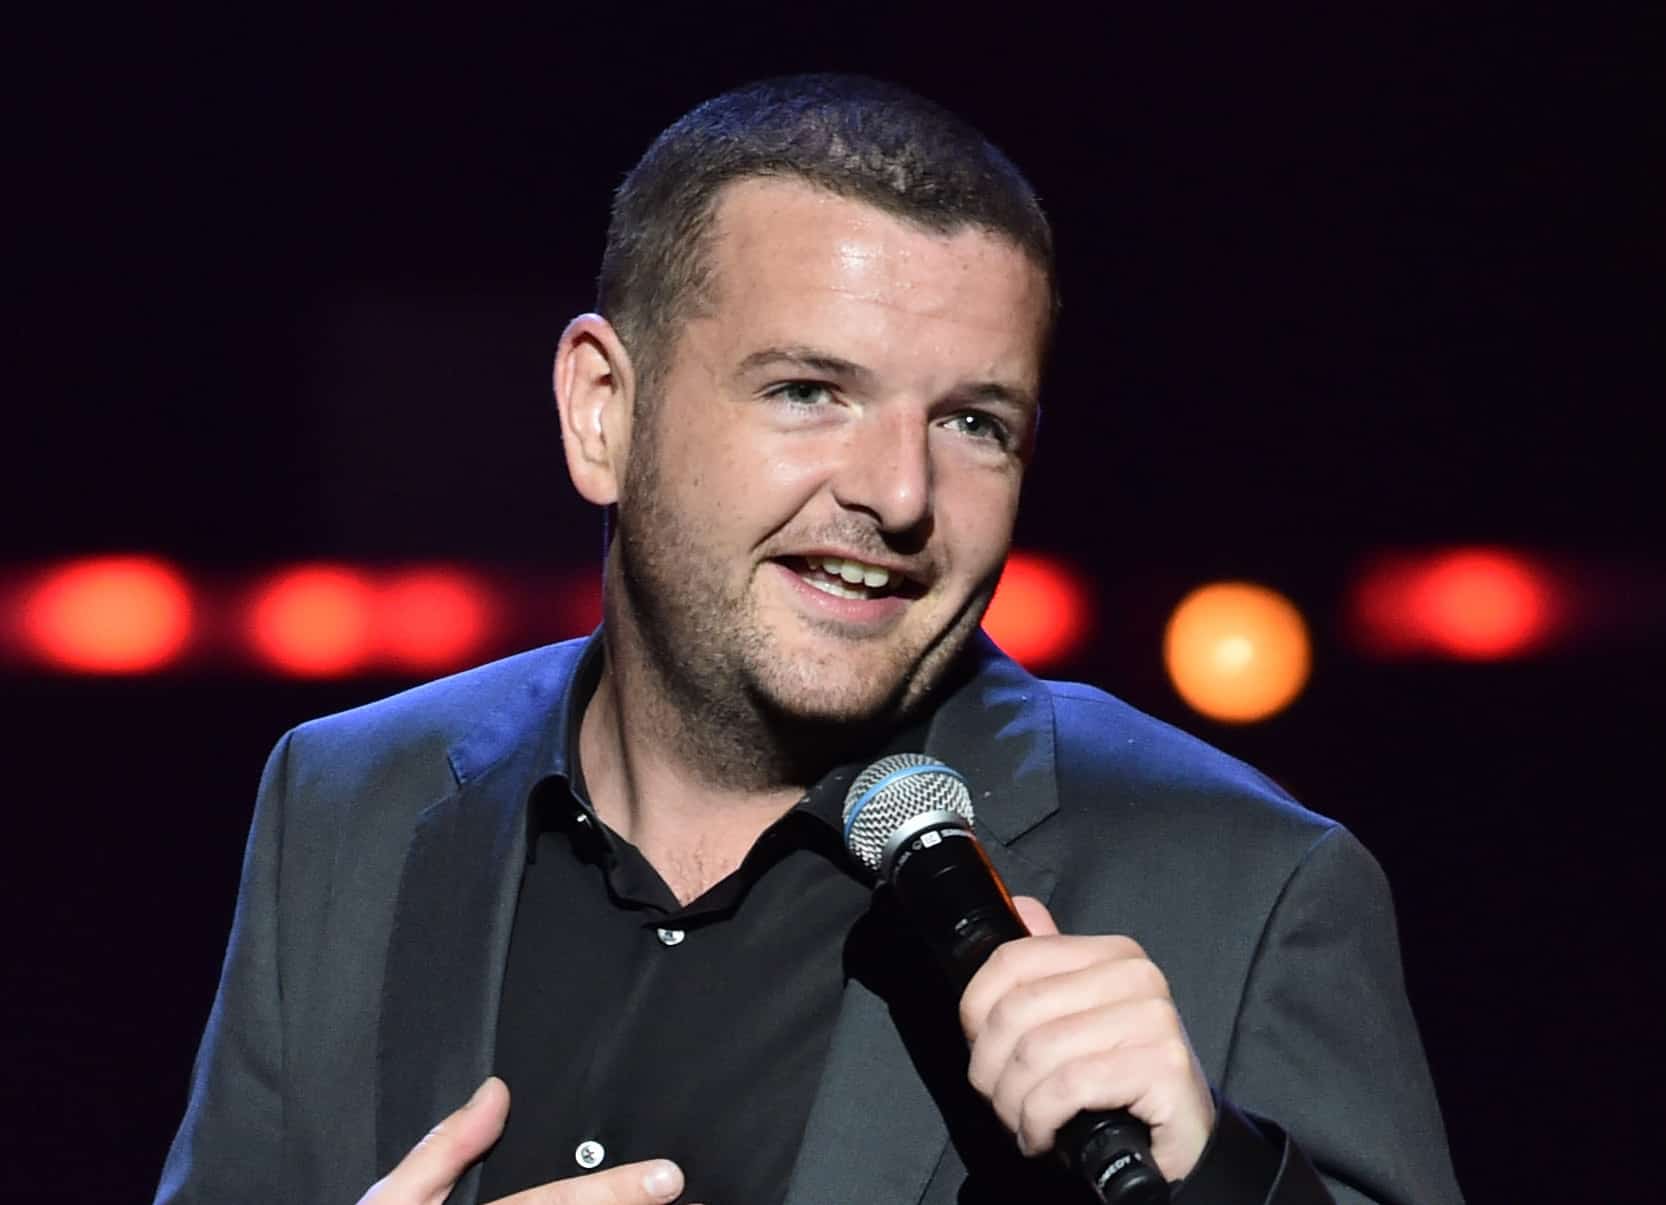 Watch: Kevin Bridges joked about Queen’s death during gig last night and said: ‘She won’t be the only old woman to die this winter’